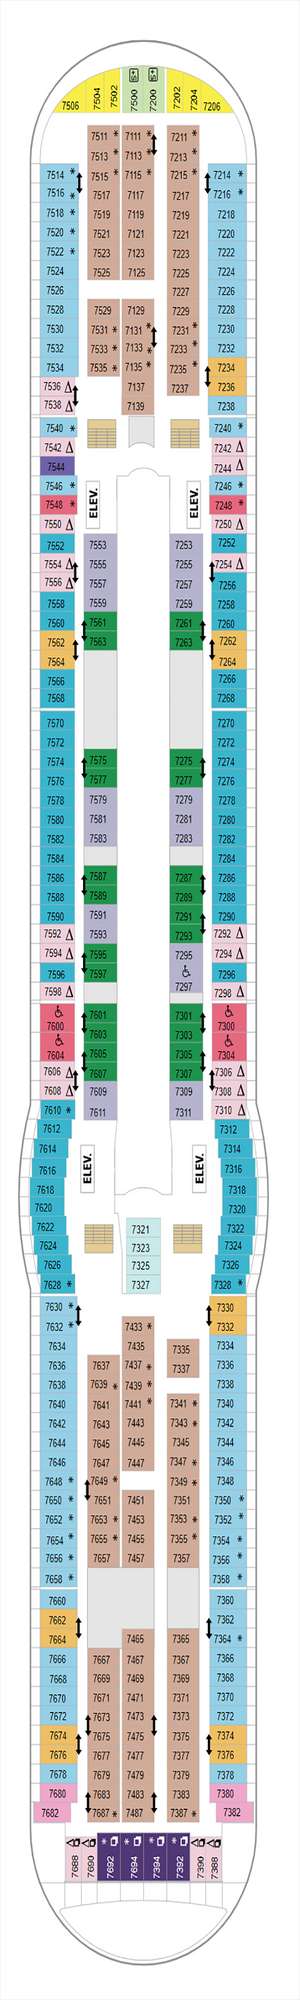 Deck plan for Mariner of the Seas